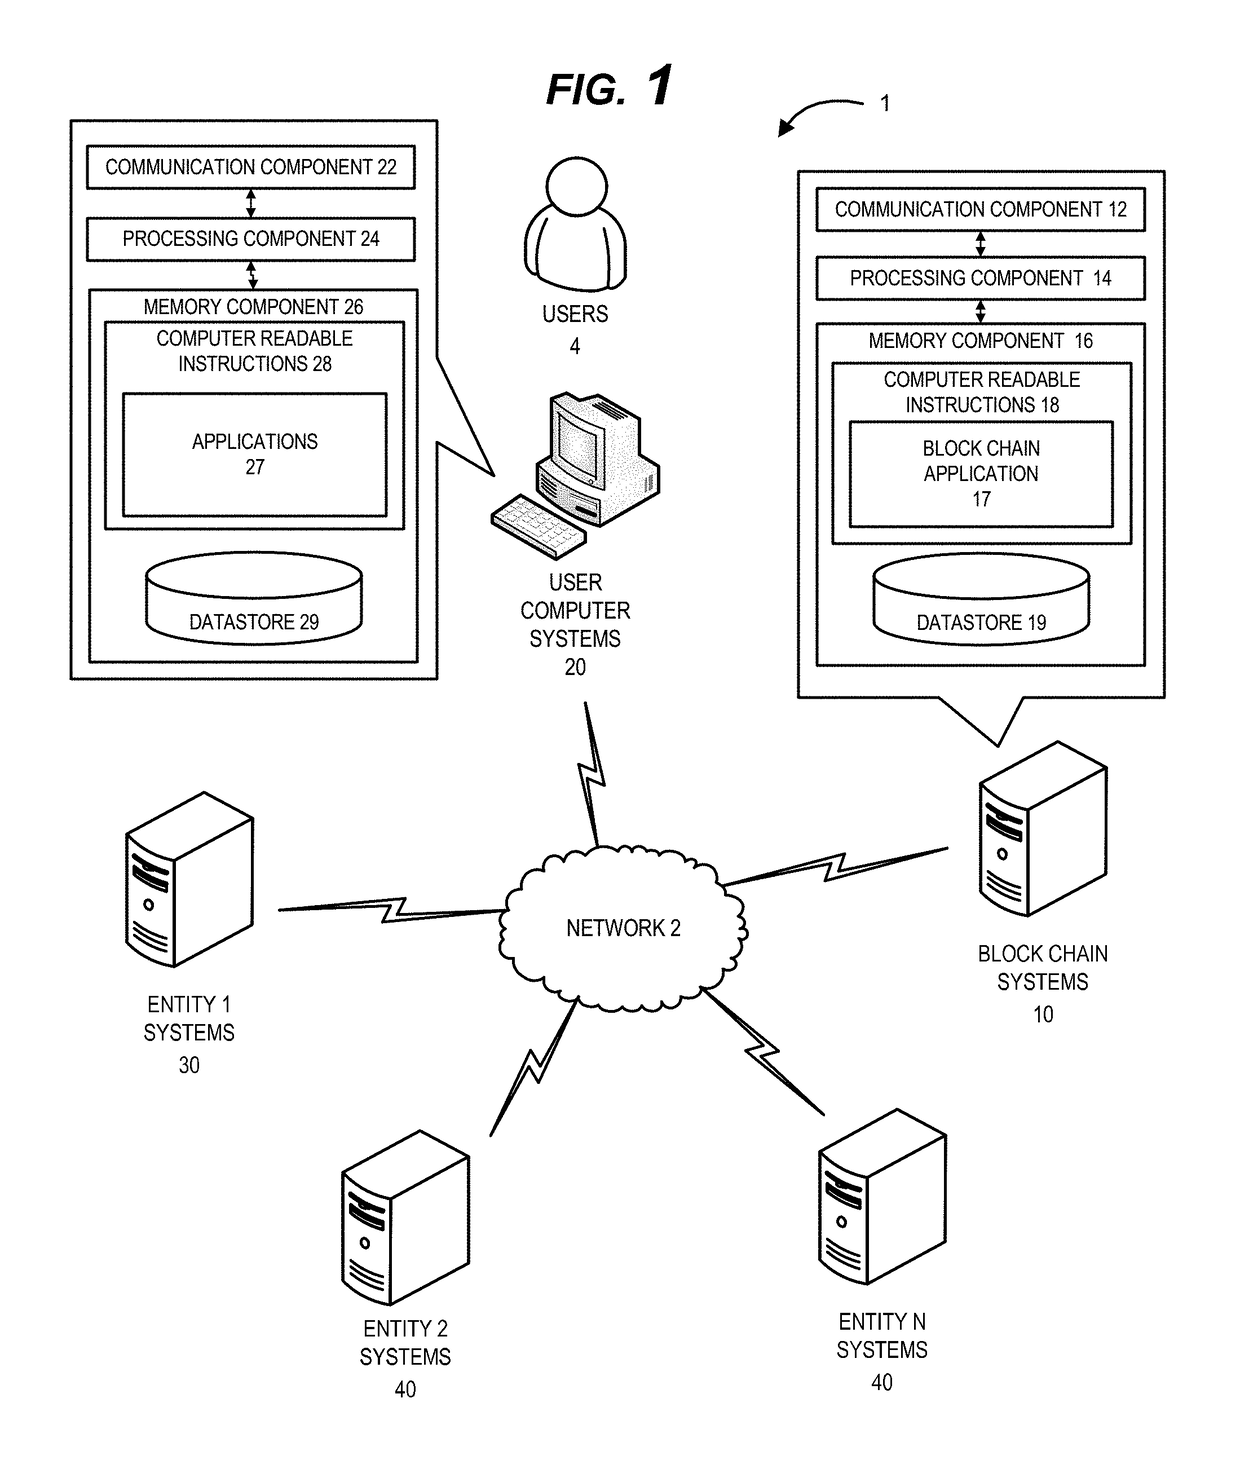 System for control of secure access and communication with different process data networks with separate security features